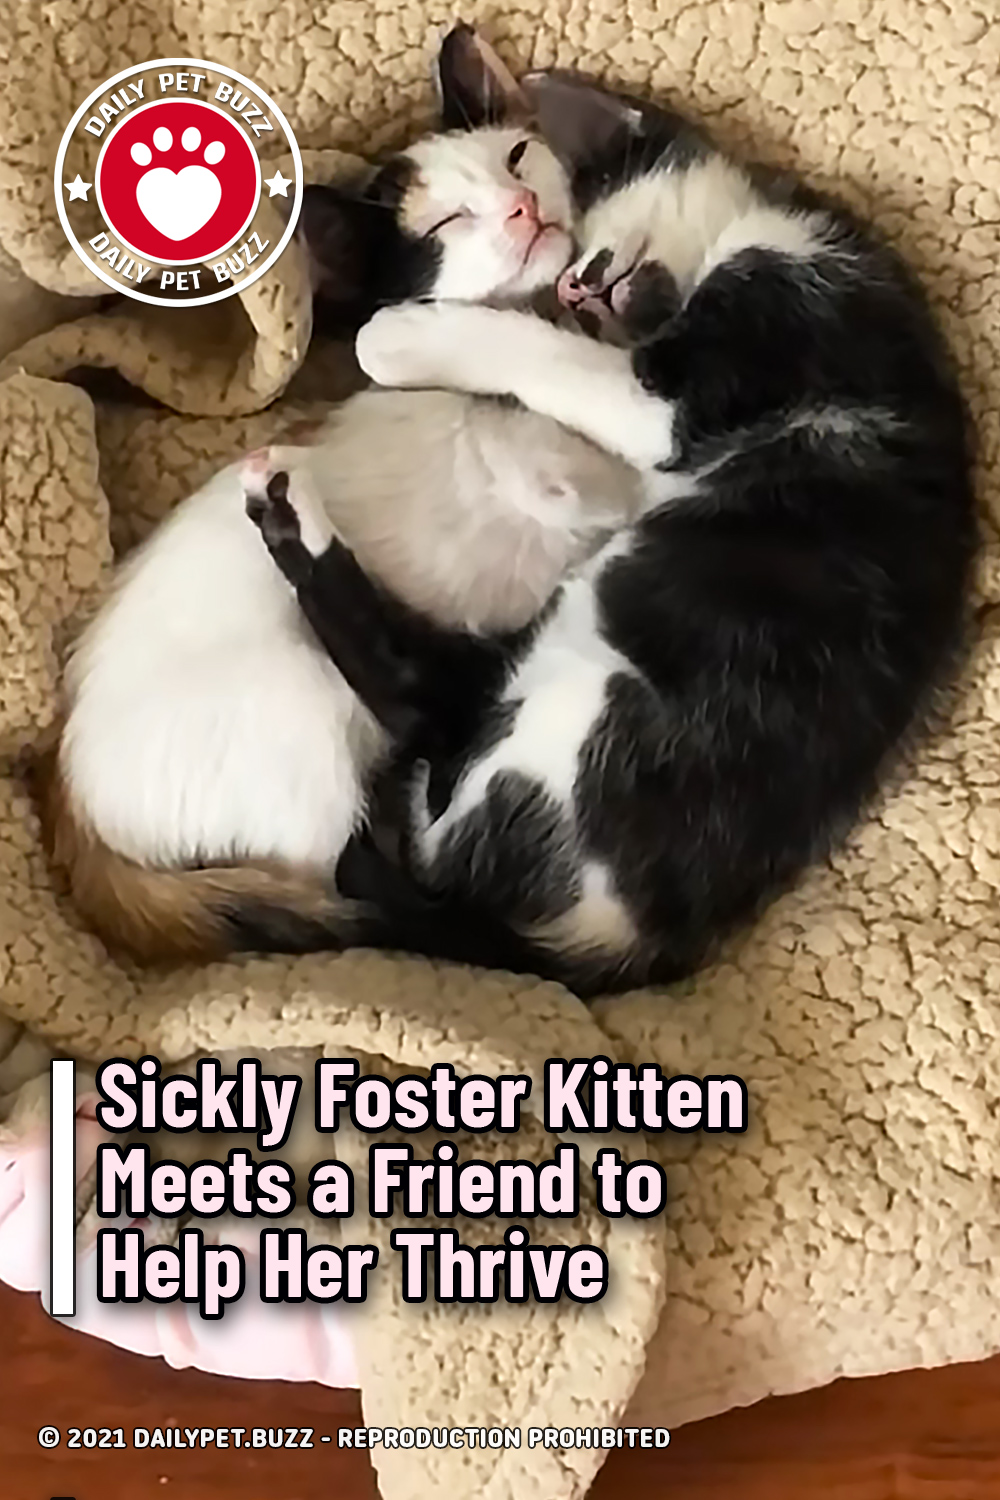 Sickly Foster Kitten Meets a Friend to Help Her Thrive